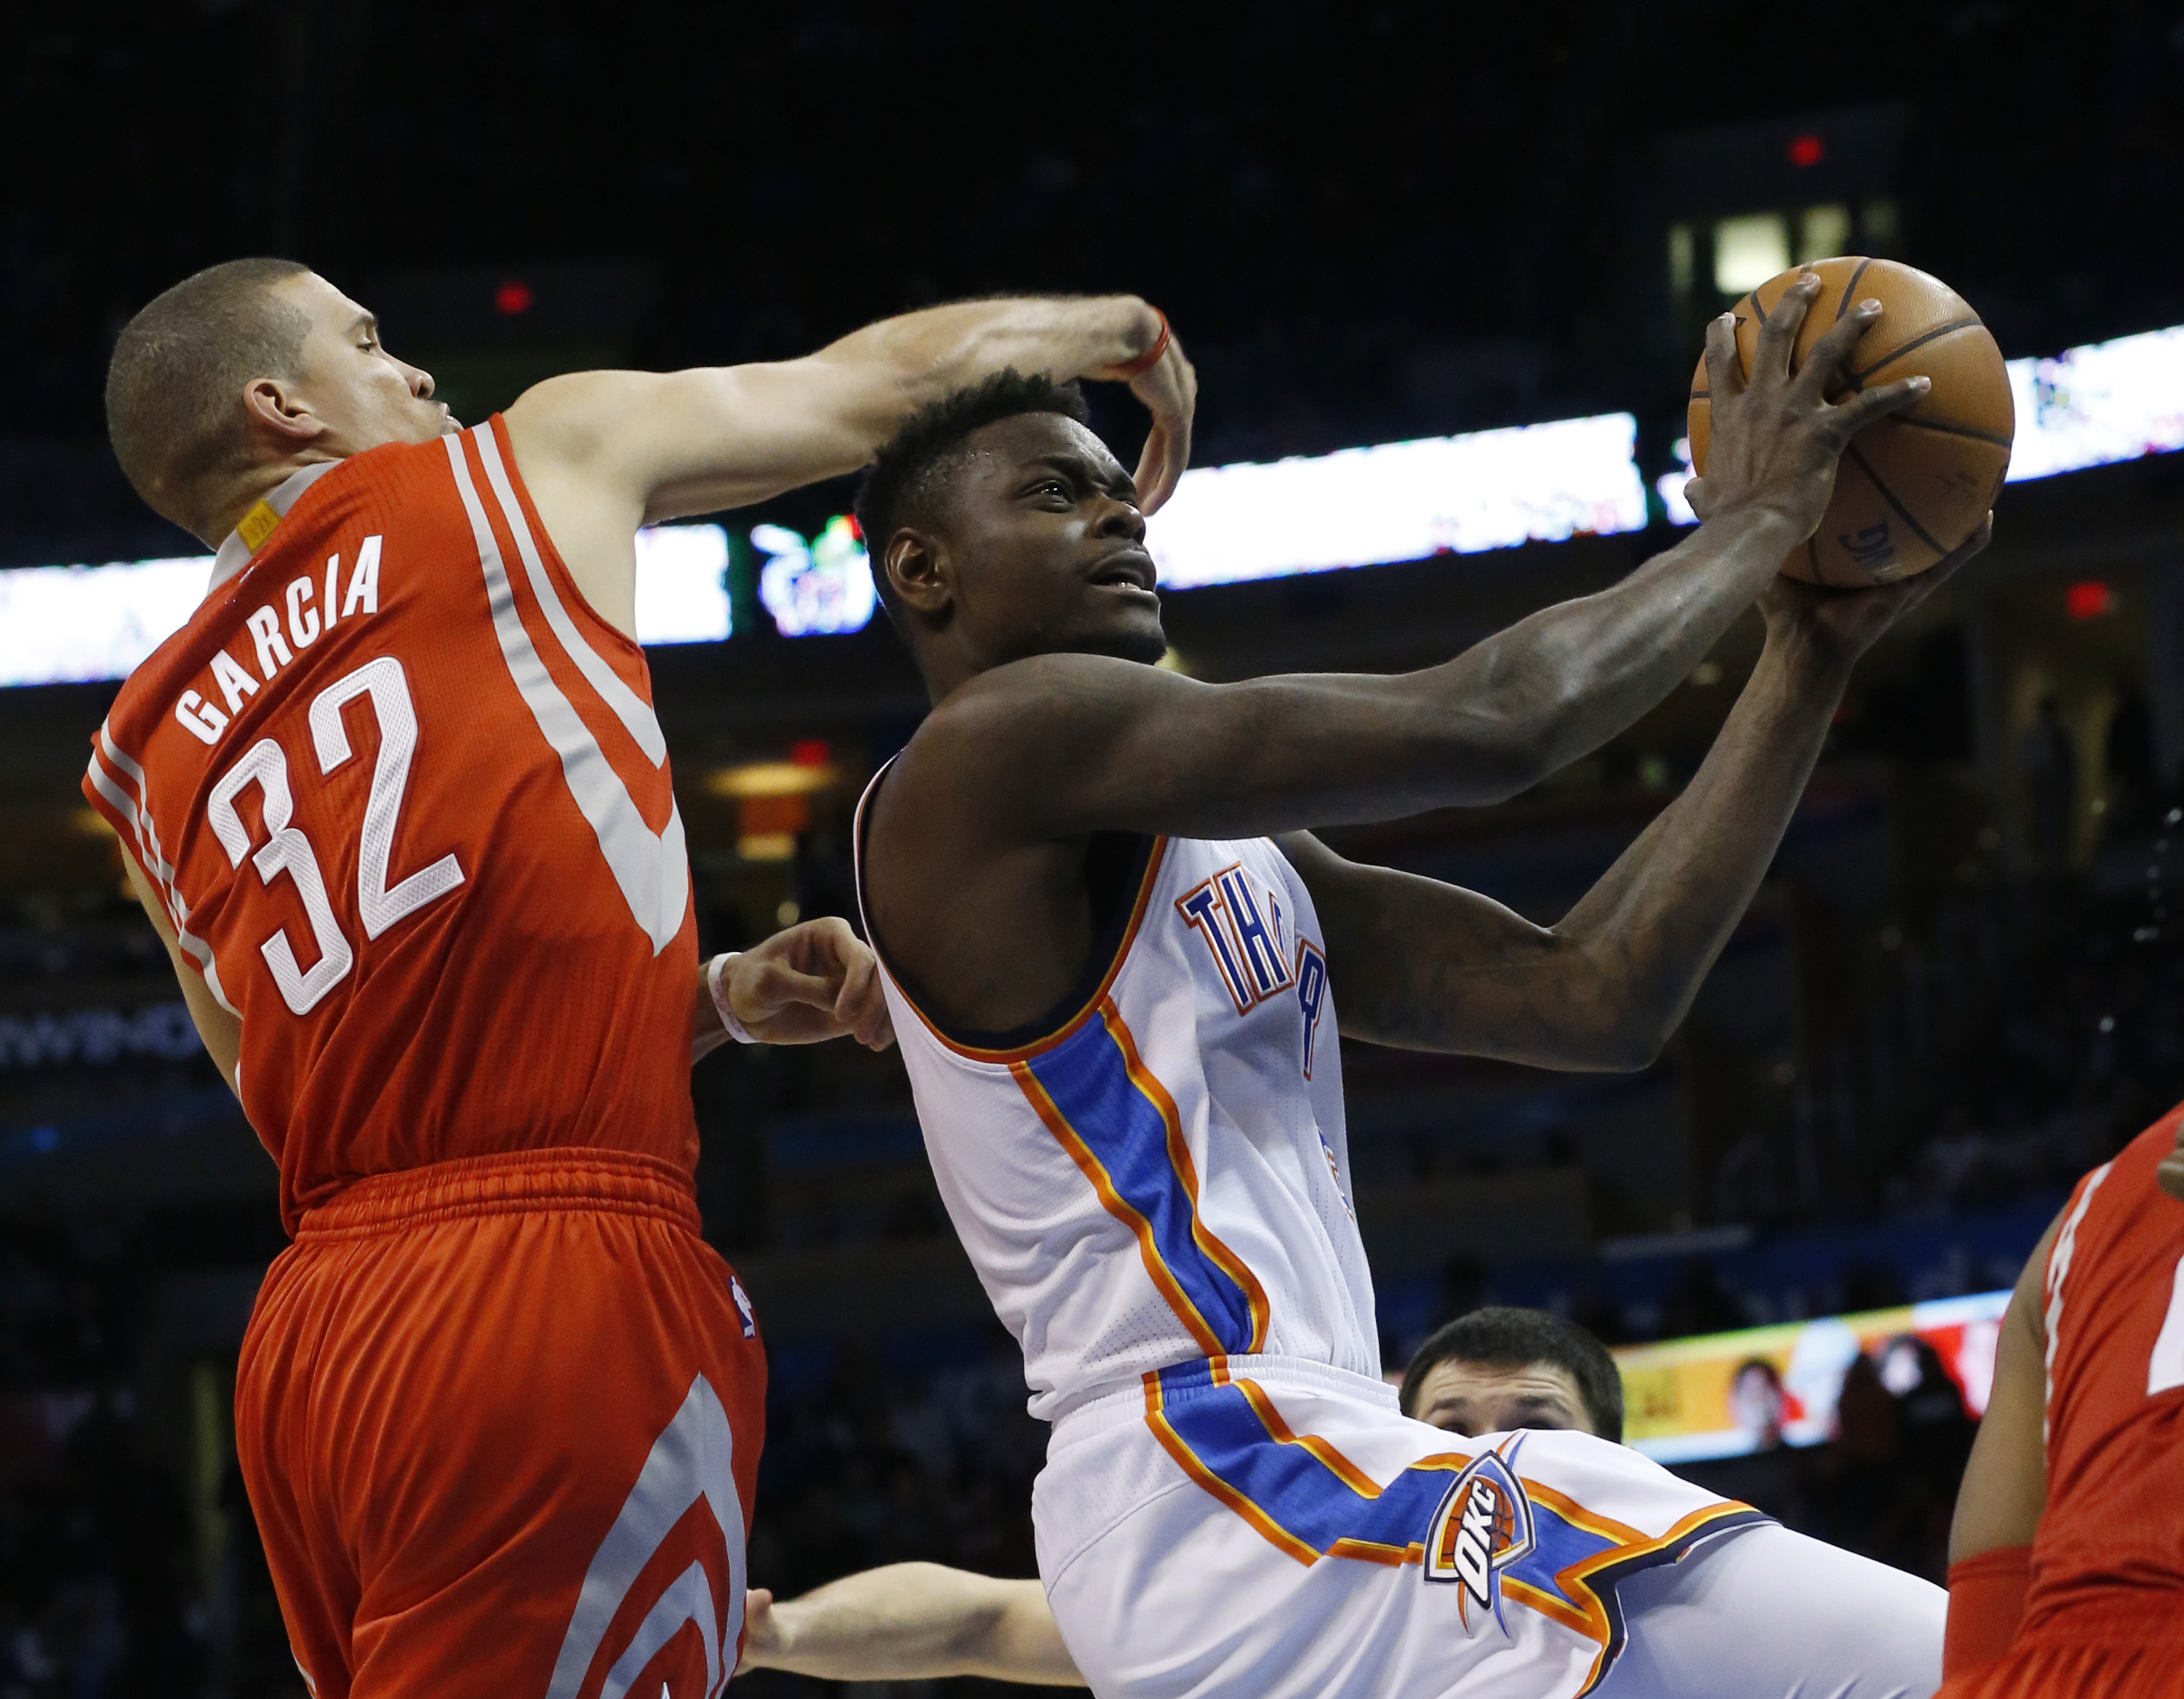 Anthony Morrow has carved out a career with sharpshooting and change-of-pace drives. (AP/Sue Ogrocki